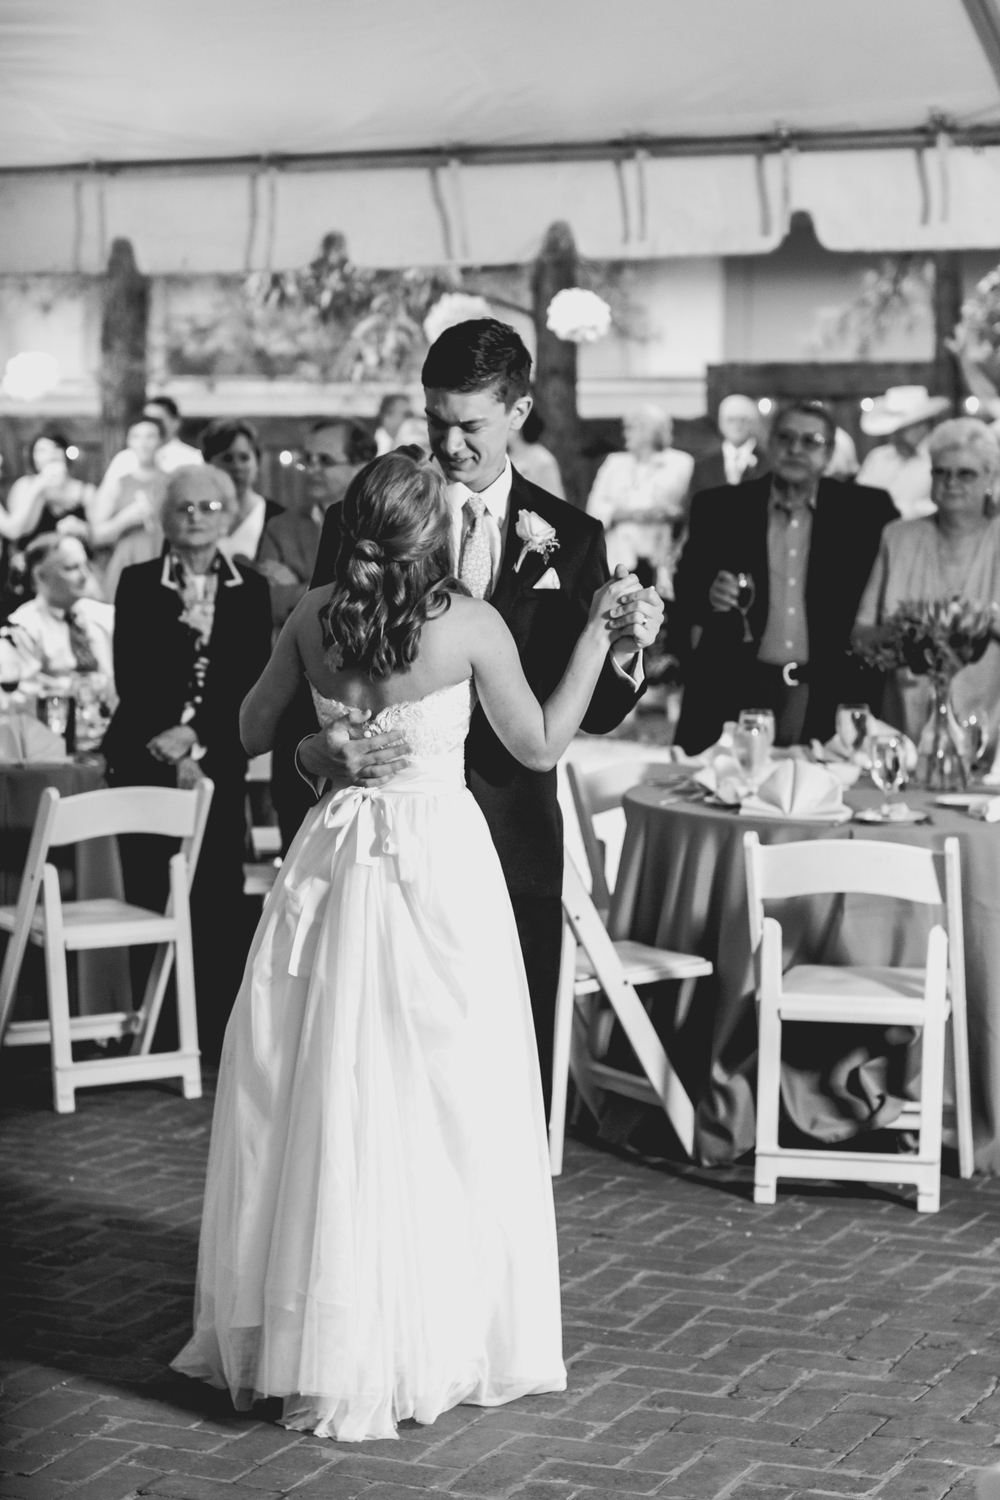   The First Dance   | #HisQueenHerEngelking Wedding | Photography by Two Arrows Photography at twoarrowsphoto.com  